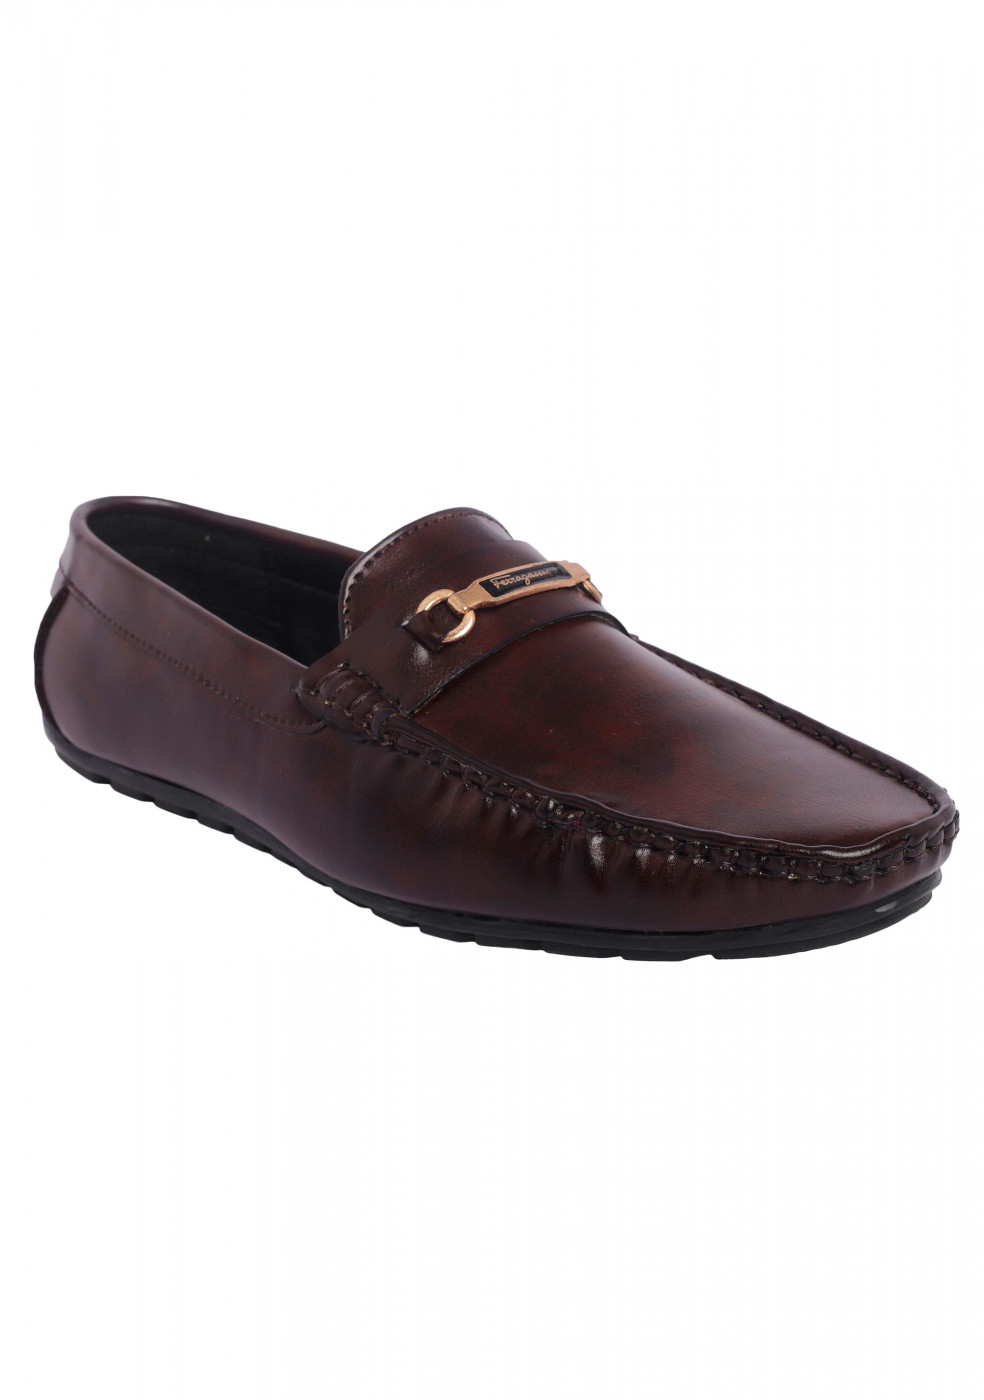 XSTOM Latest Brown Casual Loafers For Men